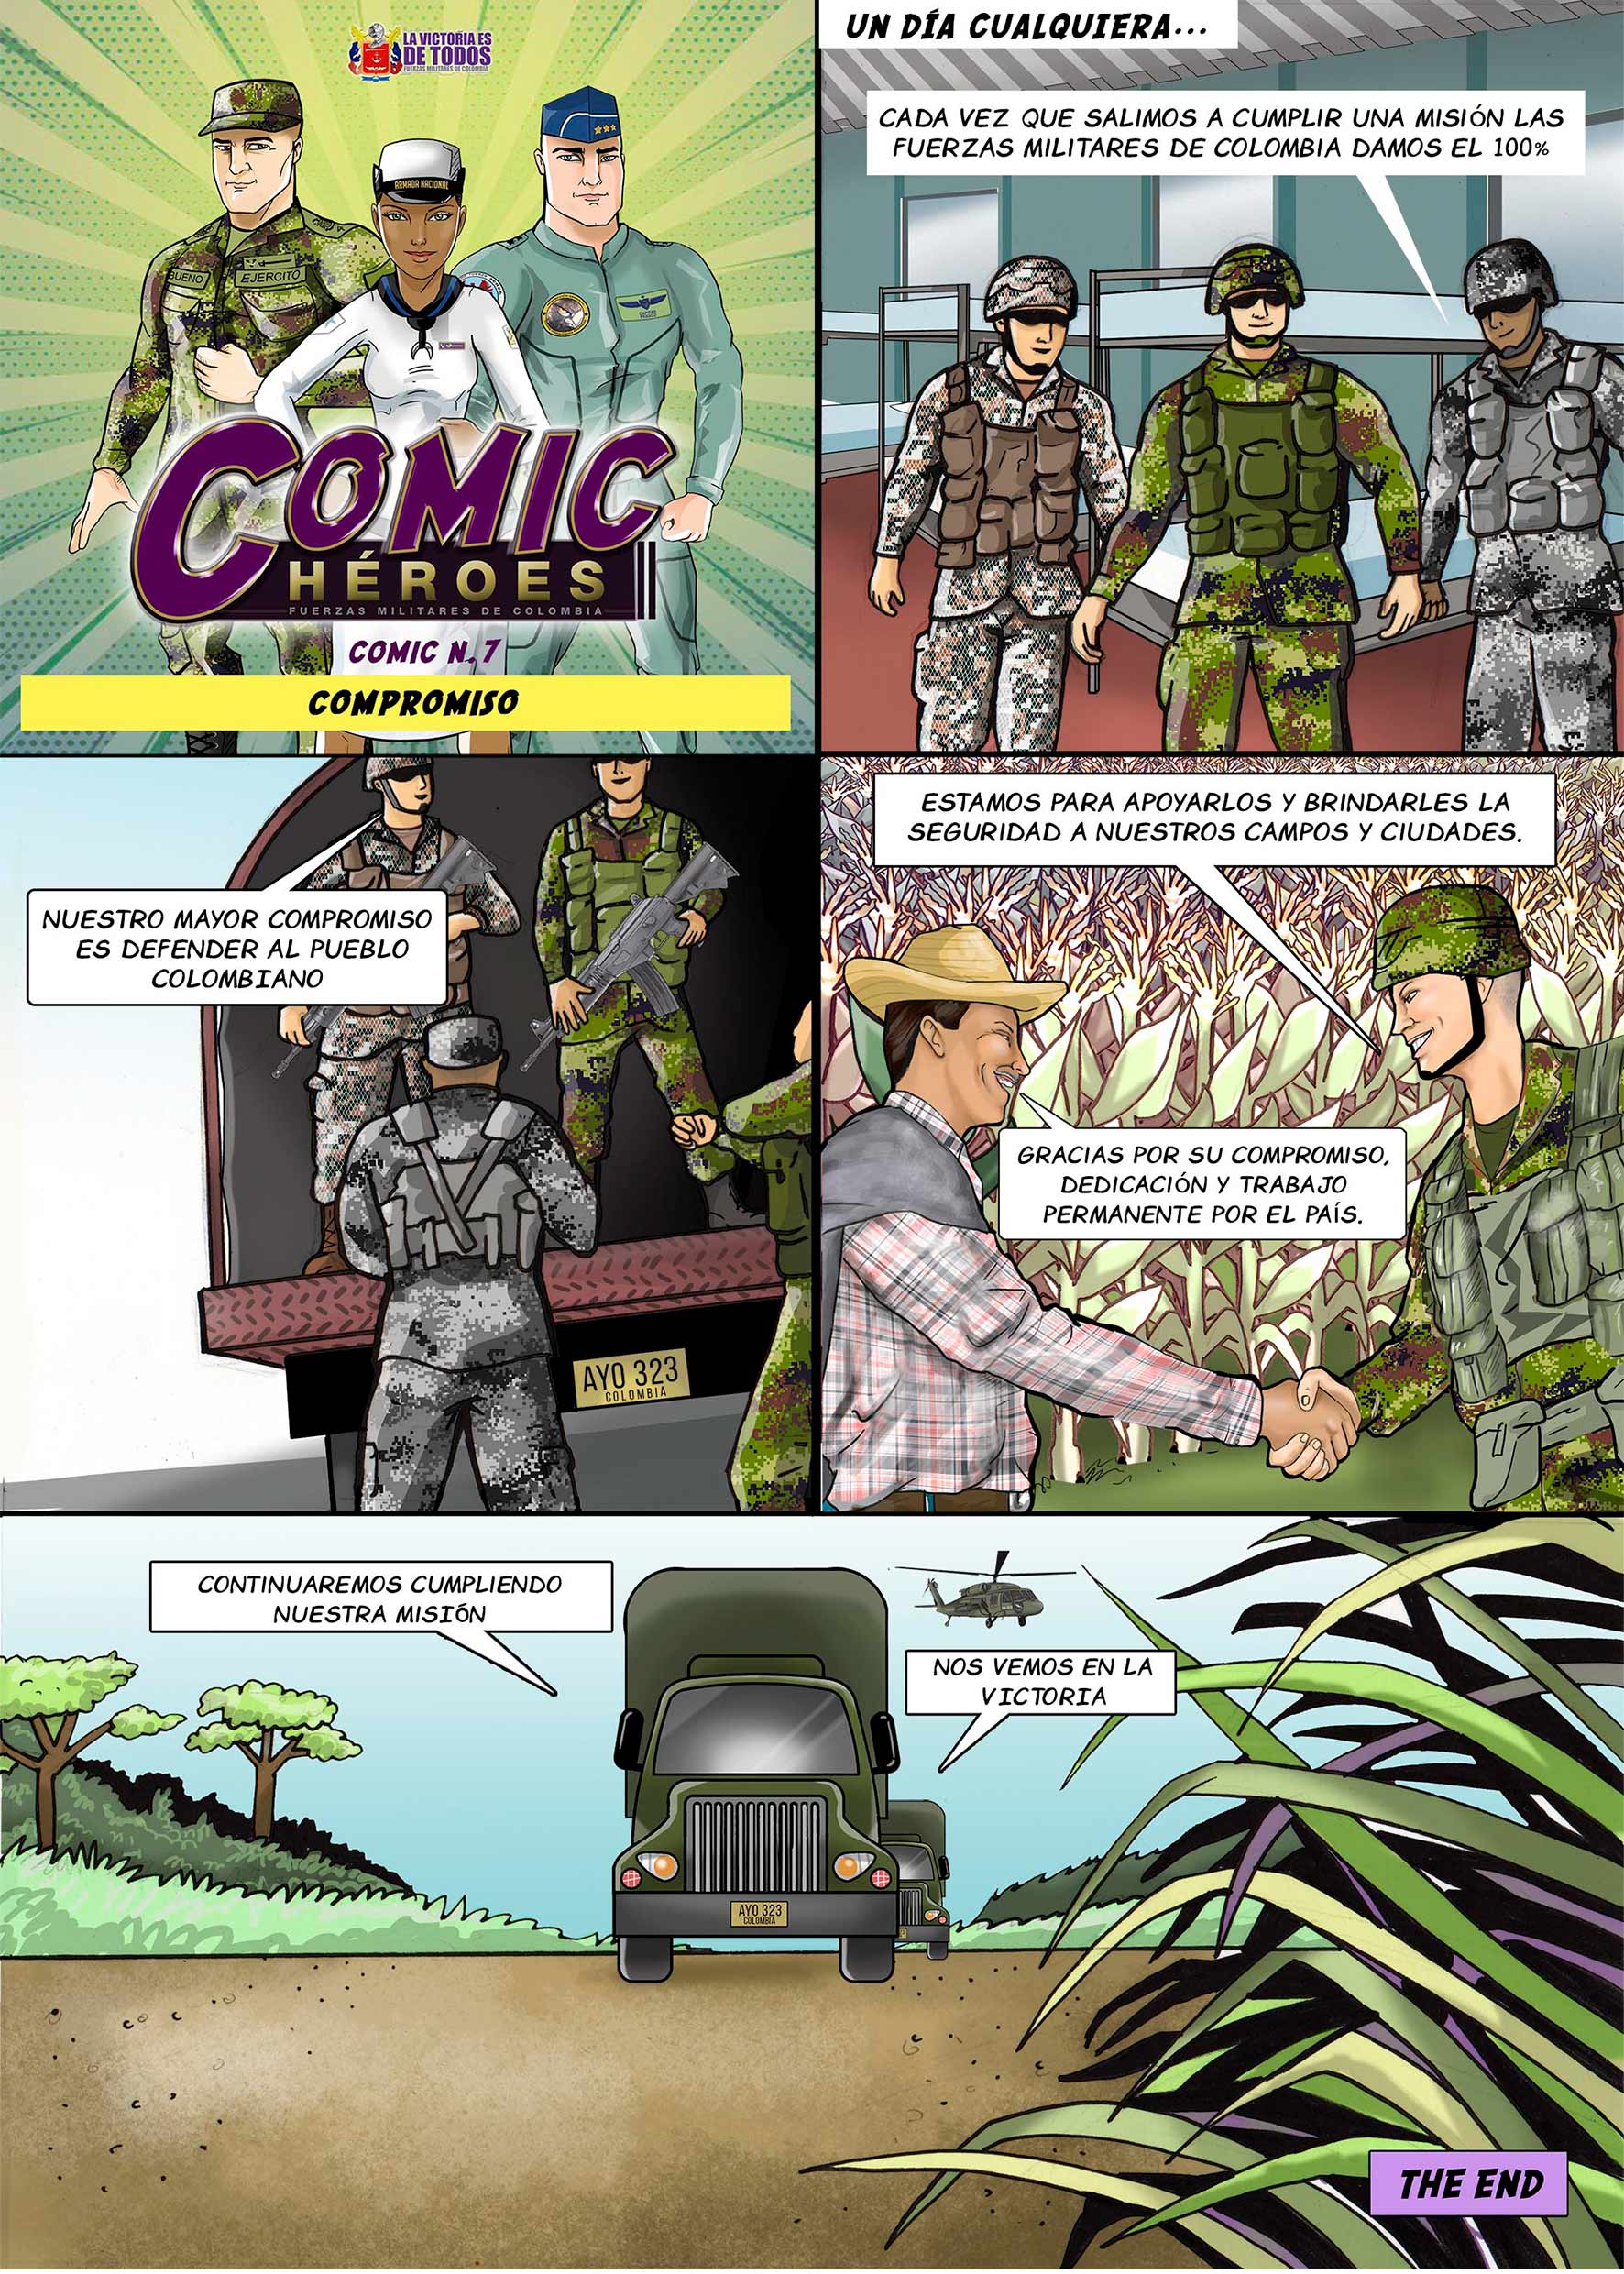 comic héroes Compromiso